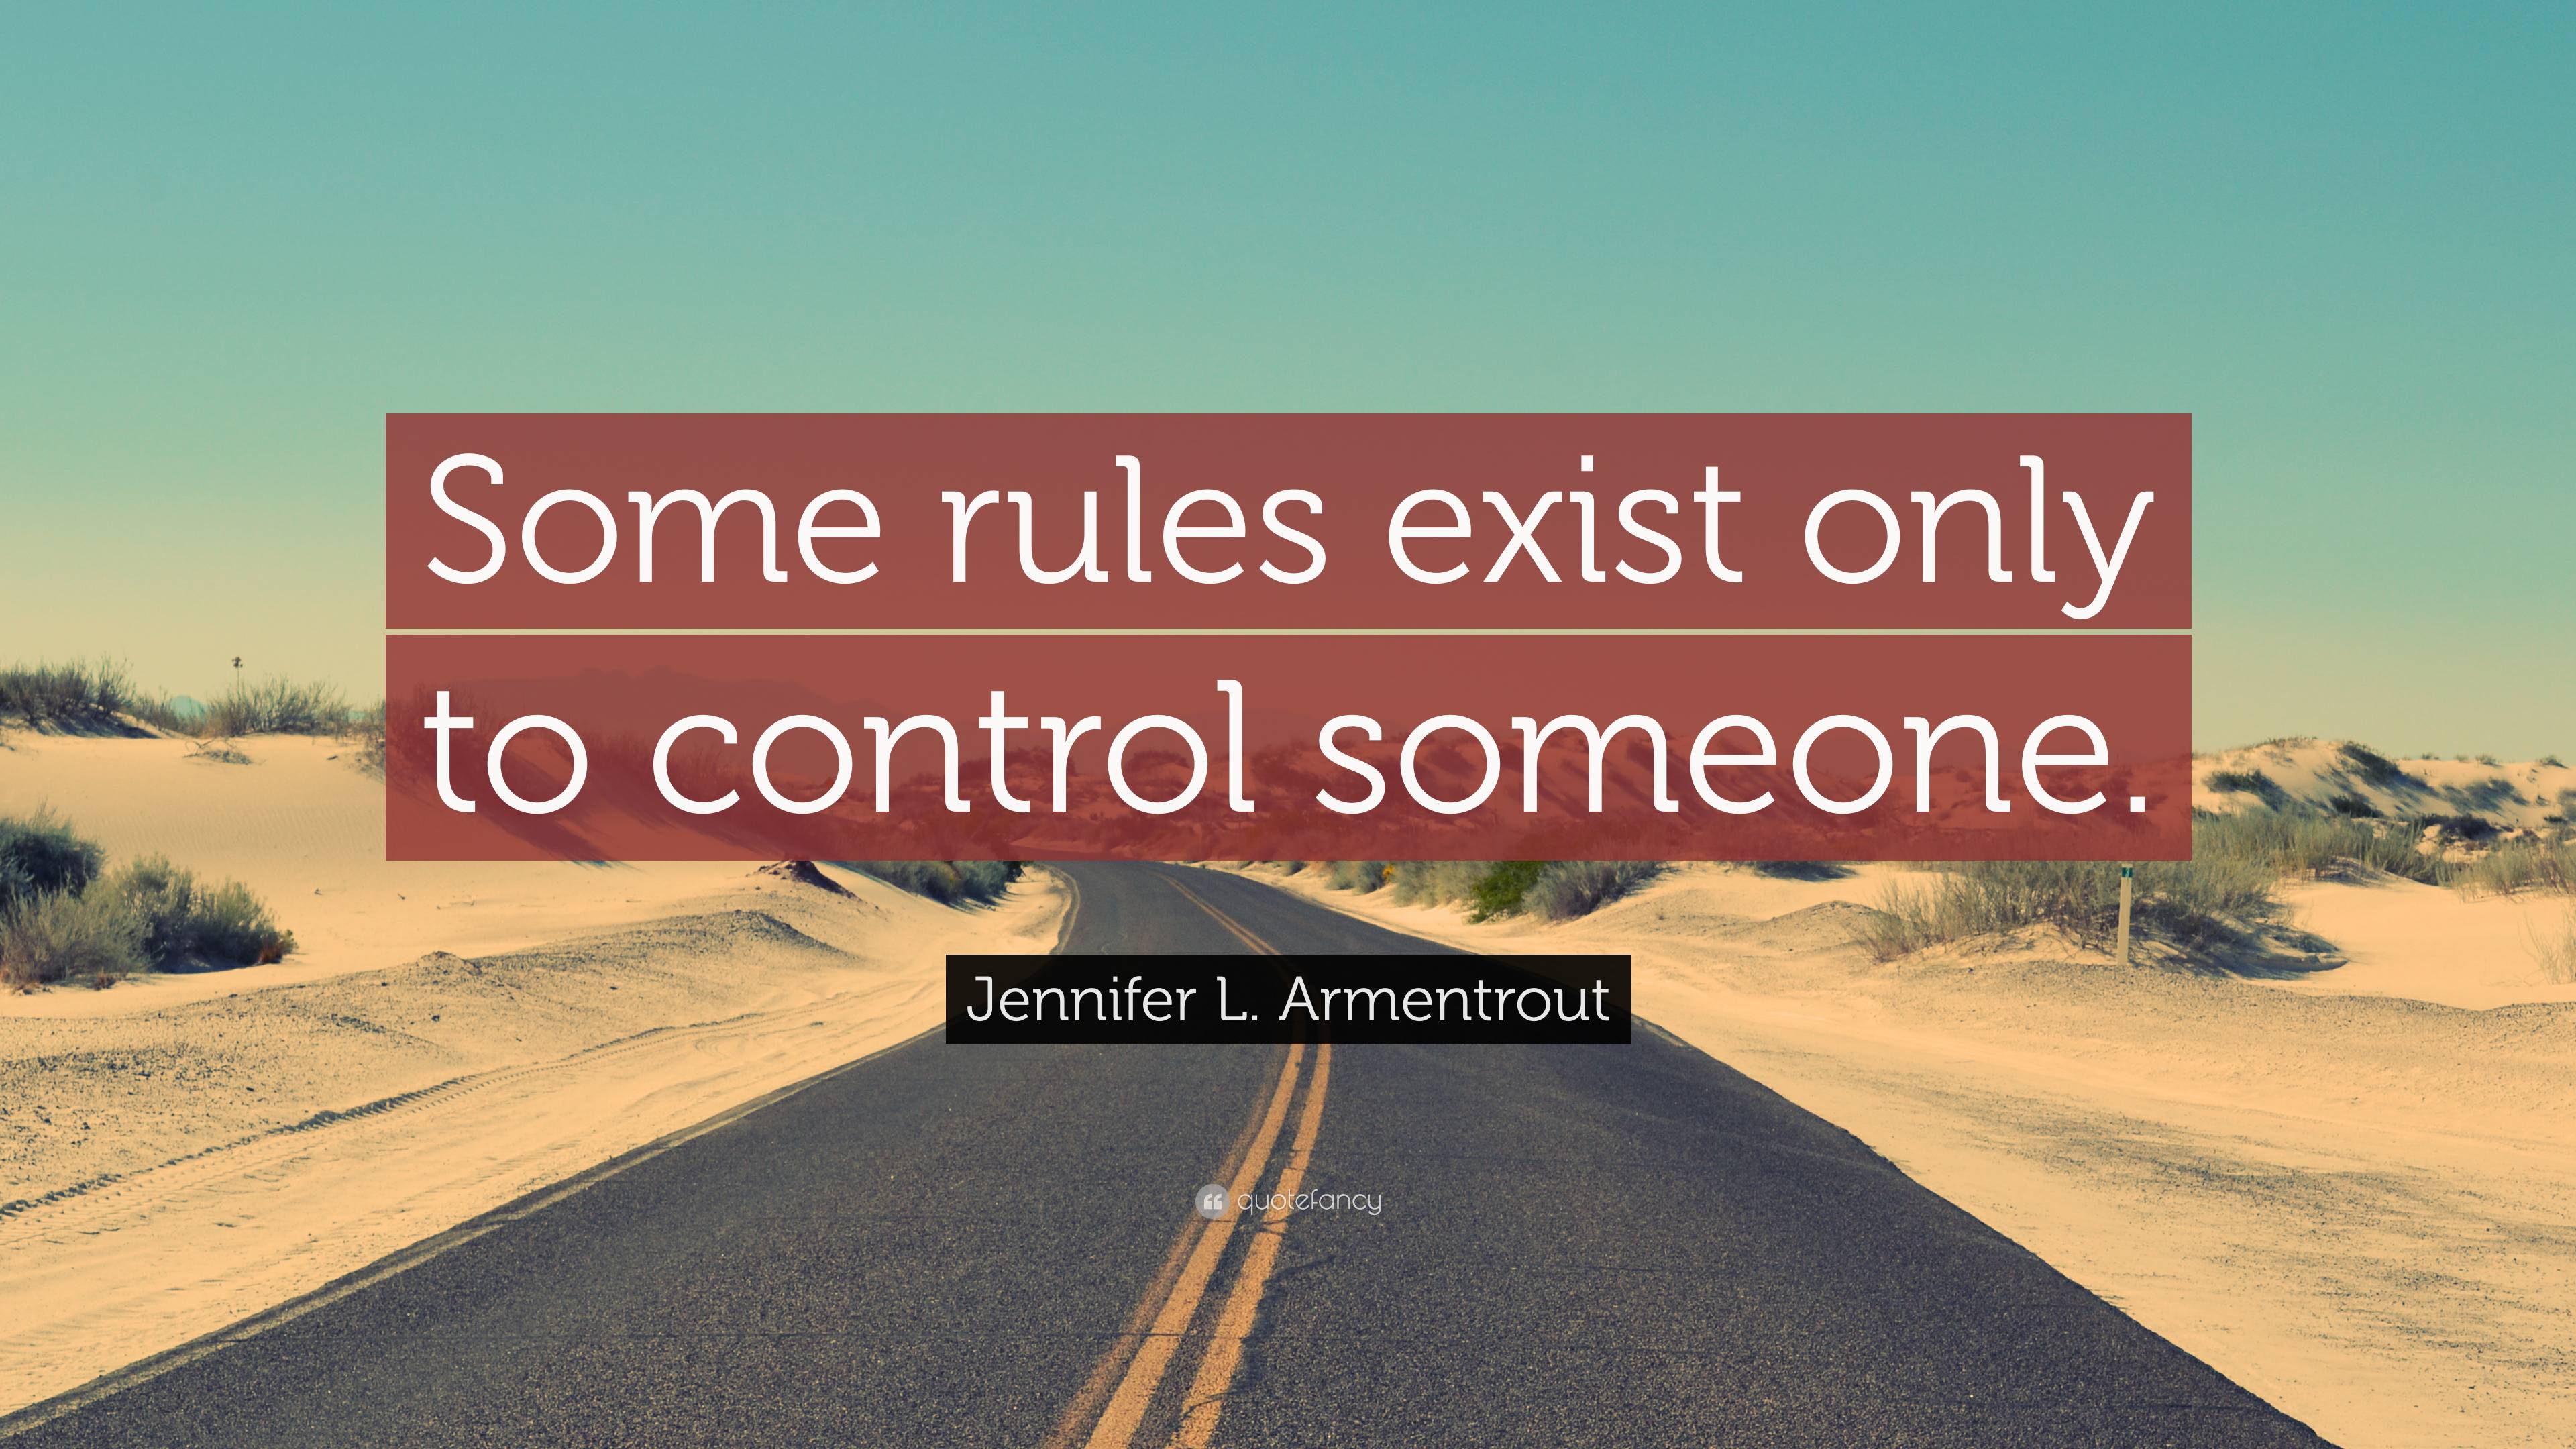 Jennifer L. Armentrout Quote: “Some rules exist only to control someone.”